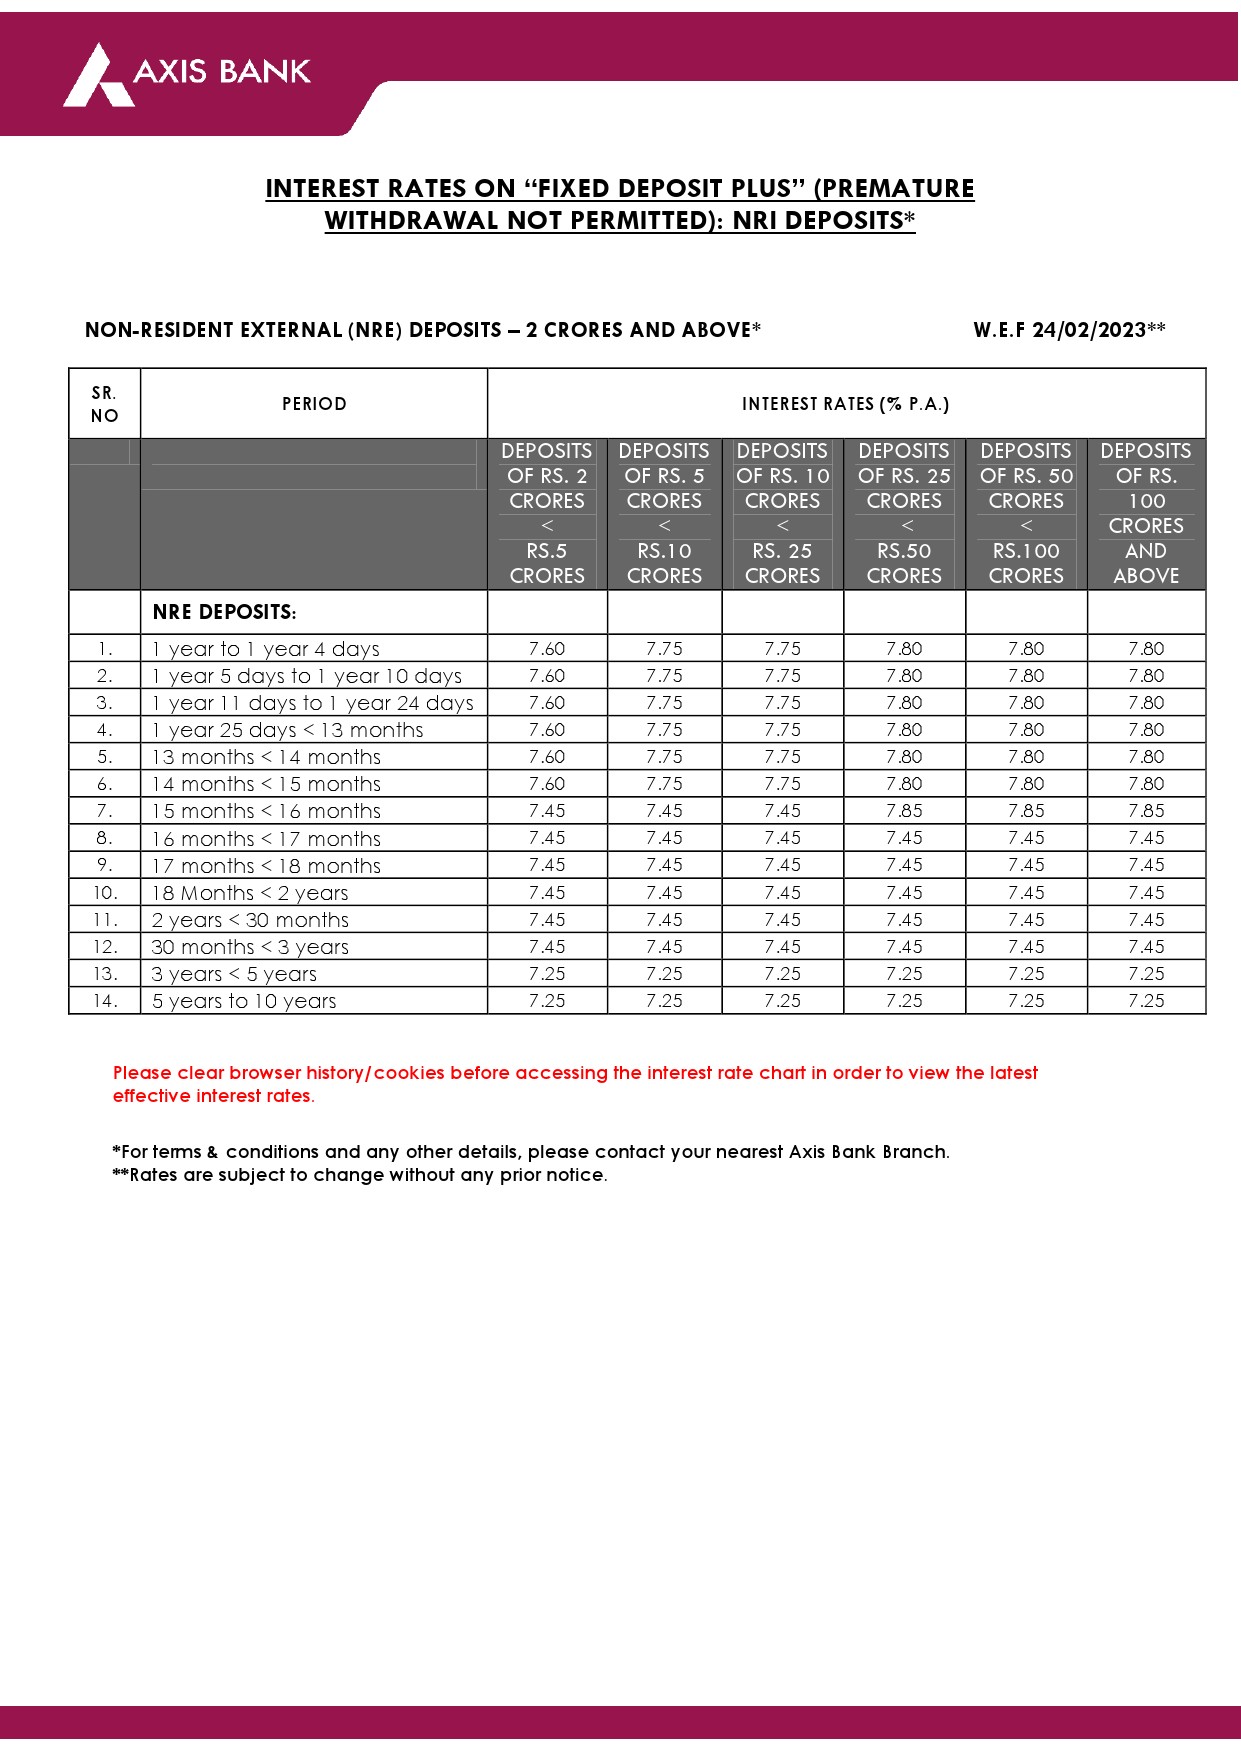 Fixed Deposit Interest Rates of Axis Bank Ltd - Image 6